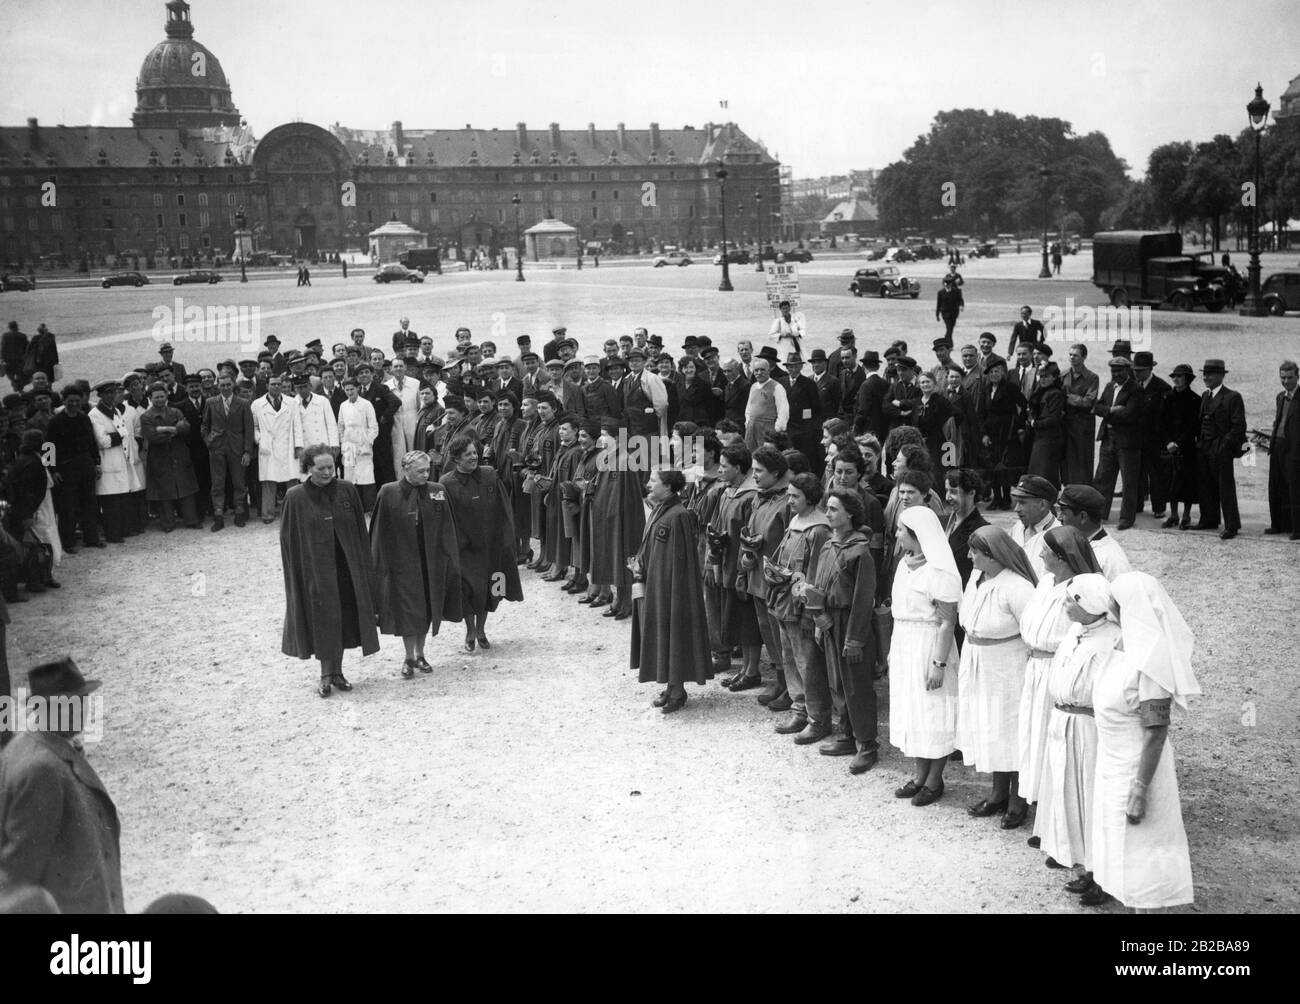 Mobilization in France during the last weeks of peace before the Second World War. In Paris, volunteers are trained as air-raid wardens. On a square in front of the Les Invalides members (three women in the middle, left: Louise Weiss, Julie Cremieux) of the Legion of Honour are inspecting the new volunteer air-raid wardens. Stock Photo